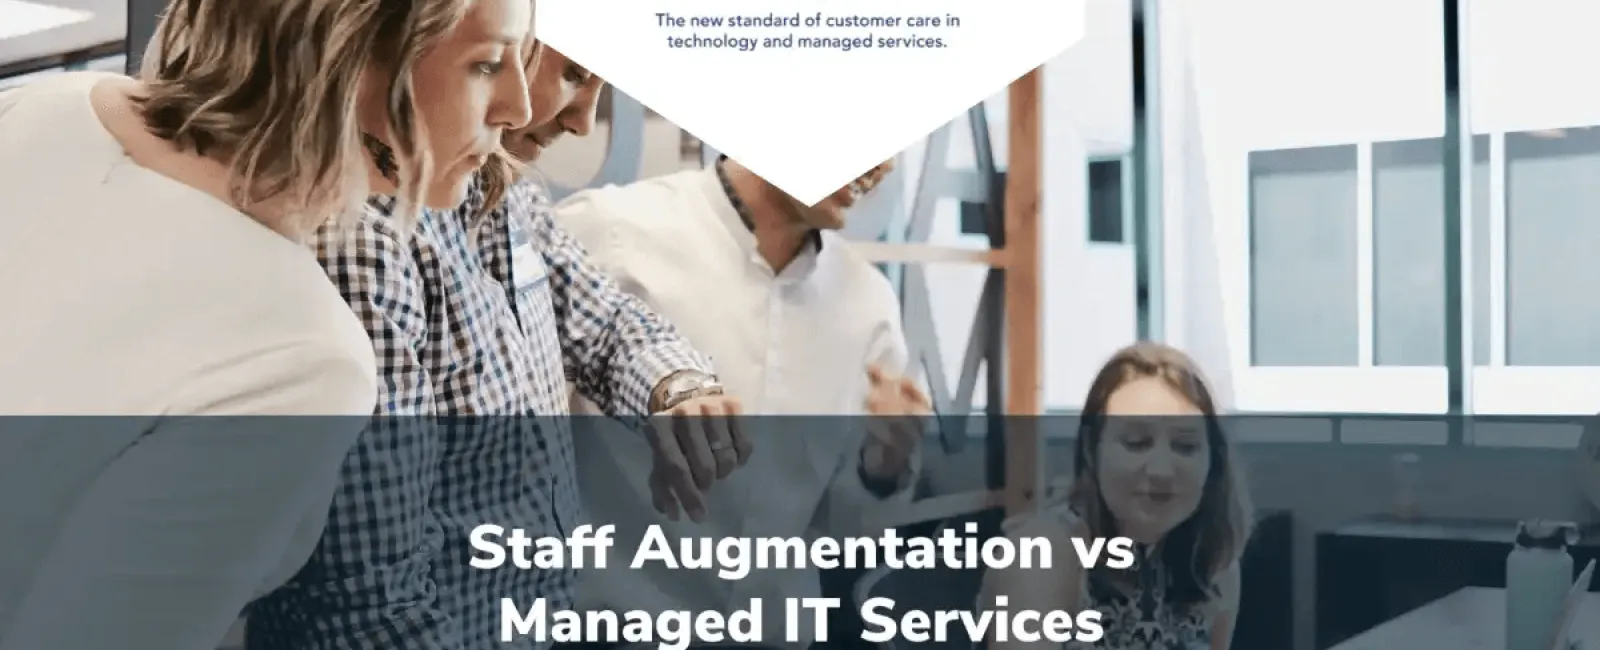 Managed IT Services vs. Staff Augmentation: Which is the Right Choice for Your Business?